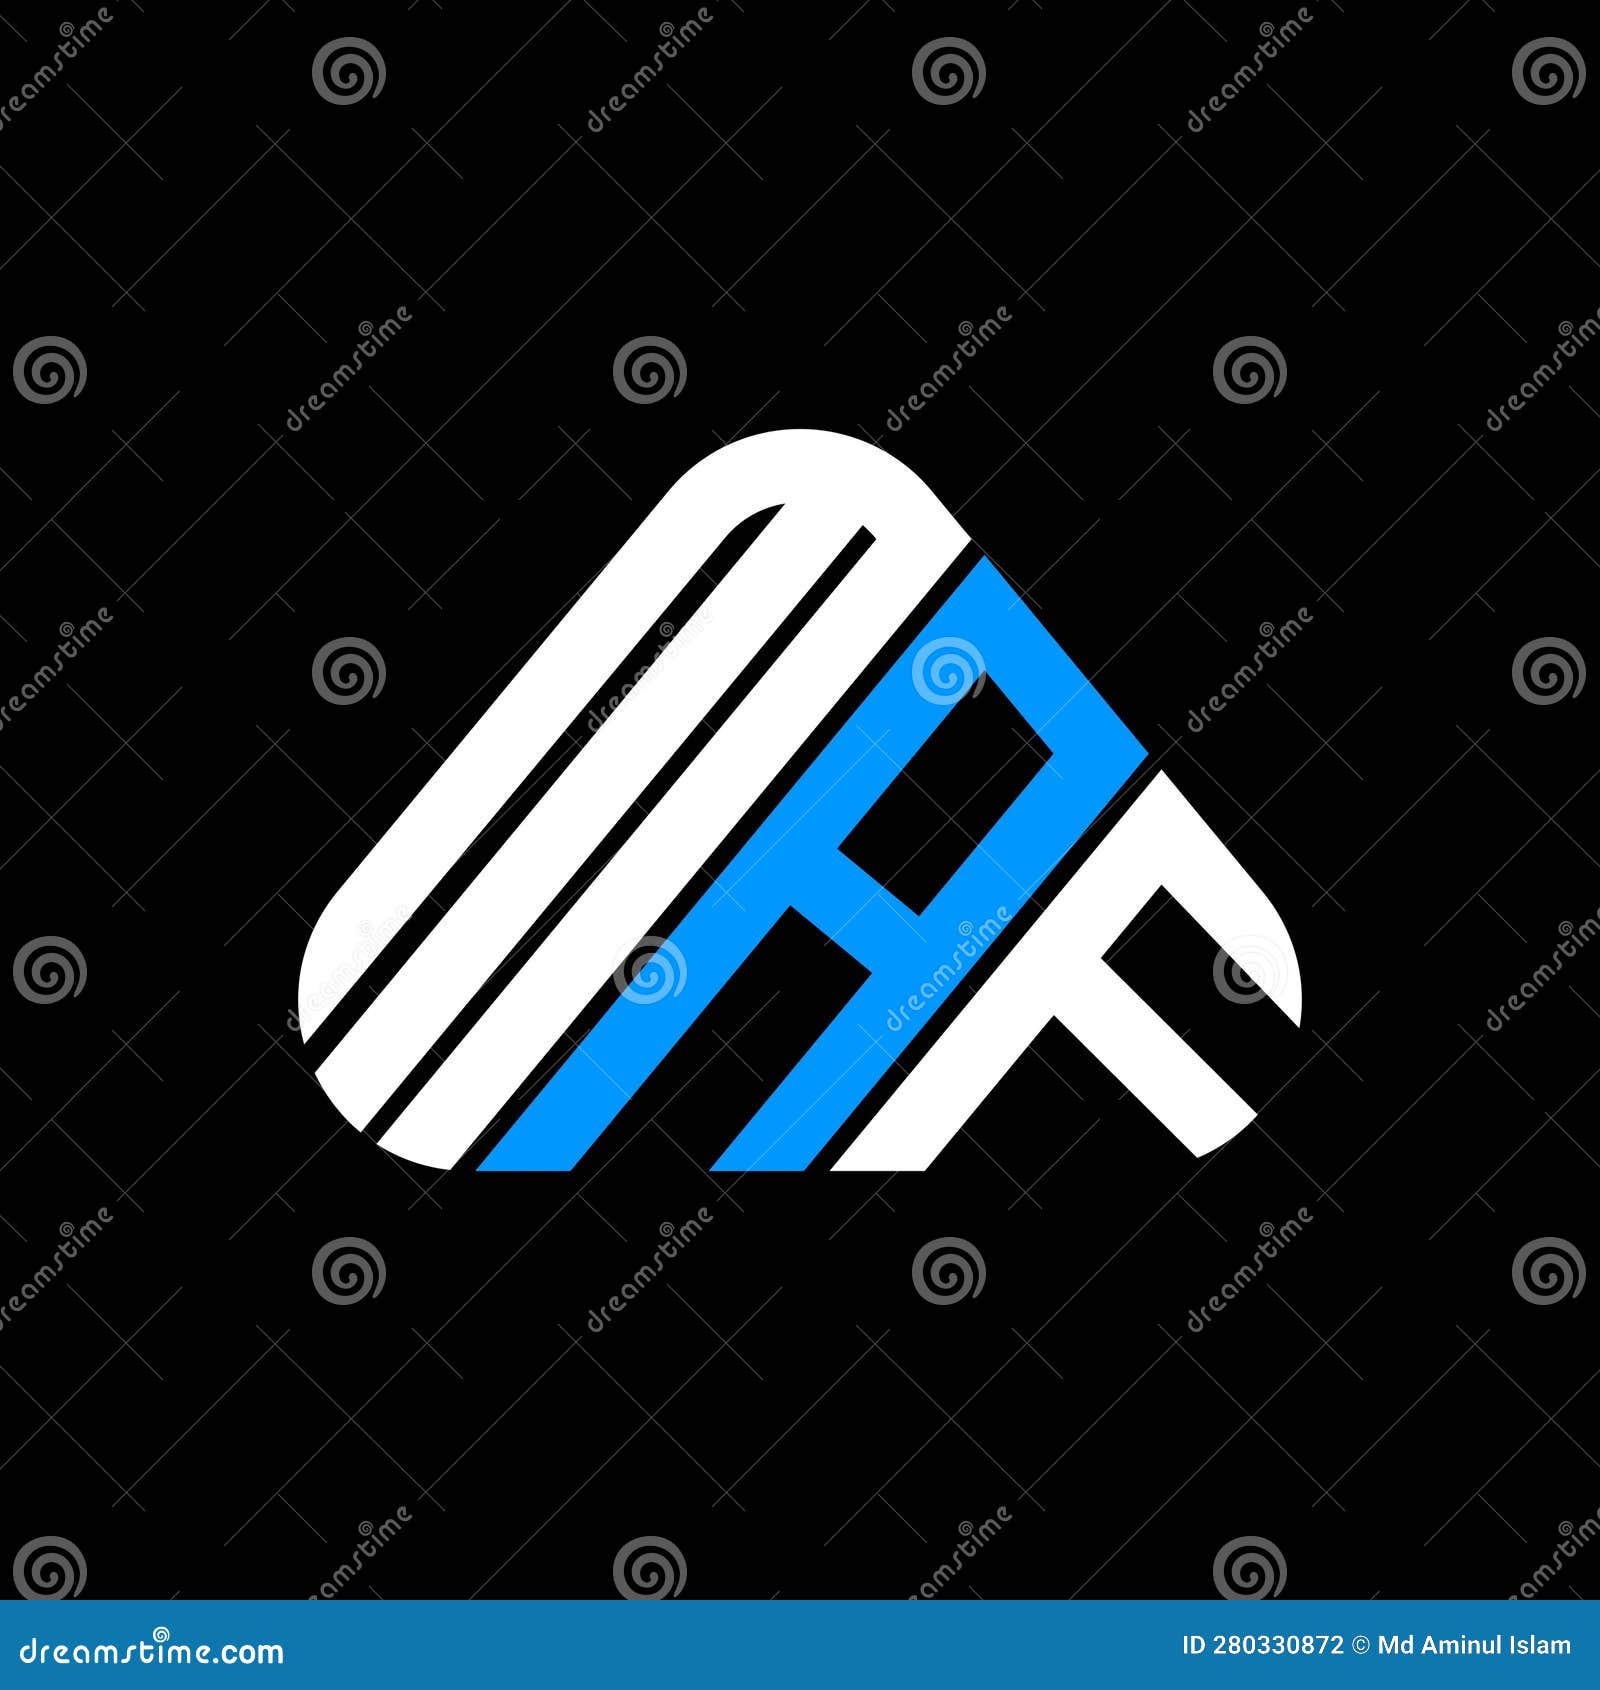 maf letter logo creative  with  graphic, maf